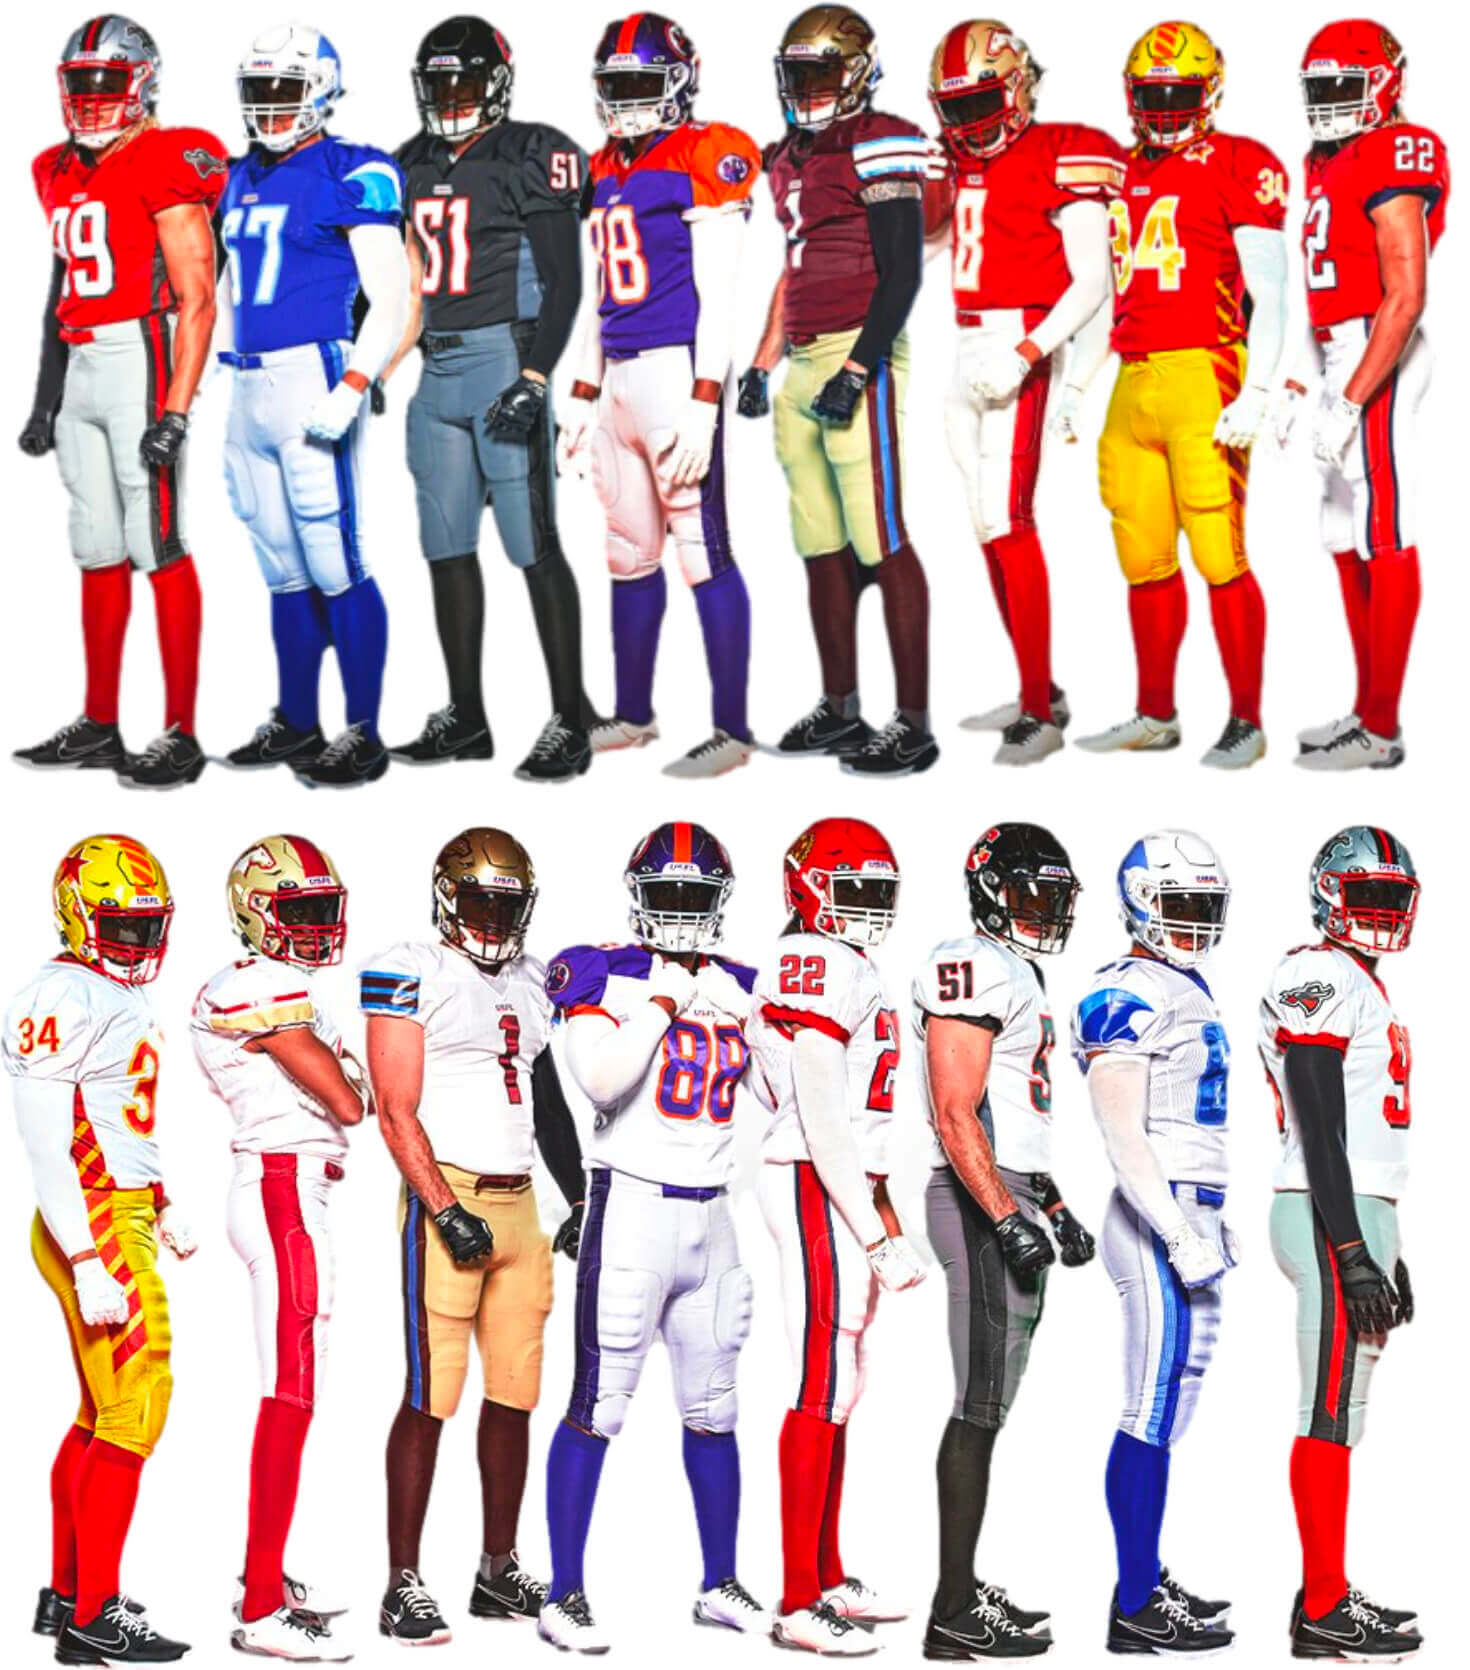 USFL 2.0 Releases Inaugural Uni Sets for All Eight Teams